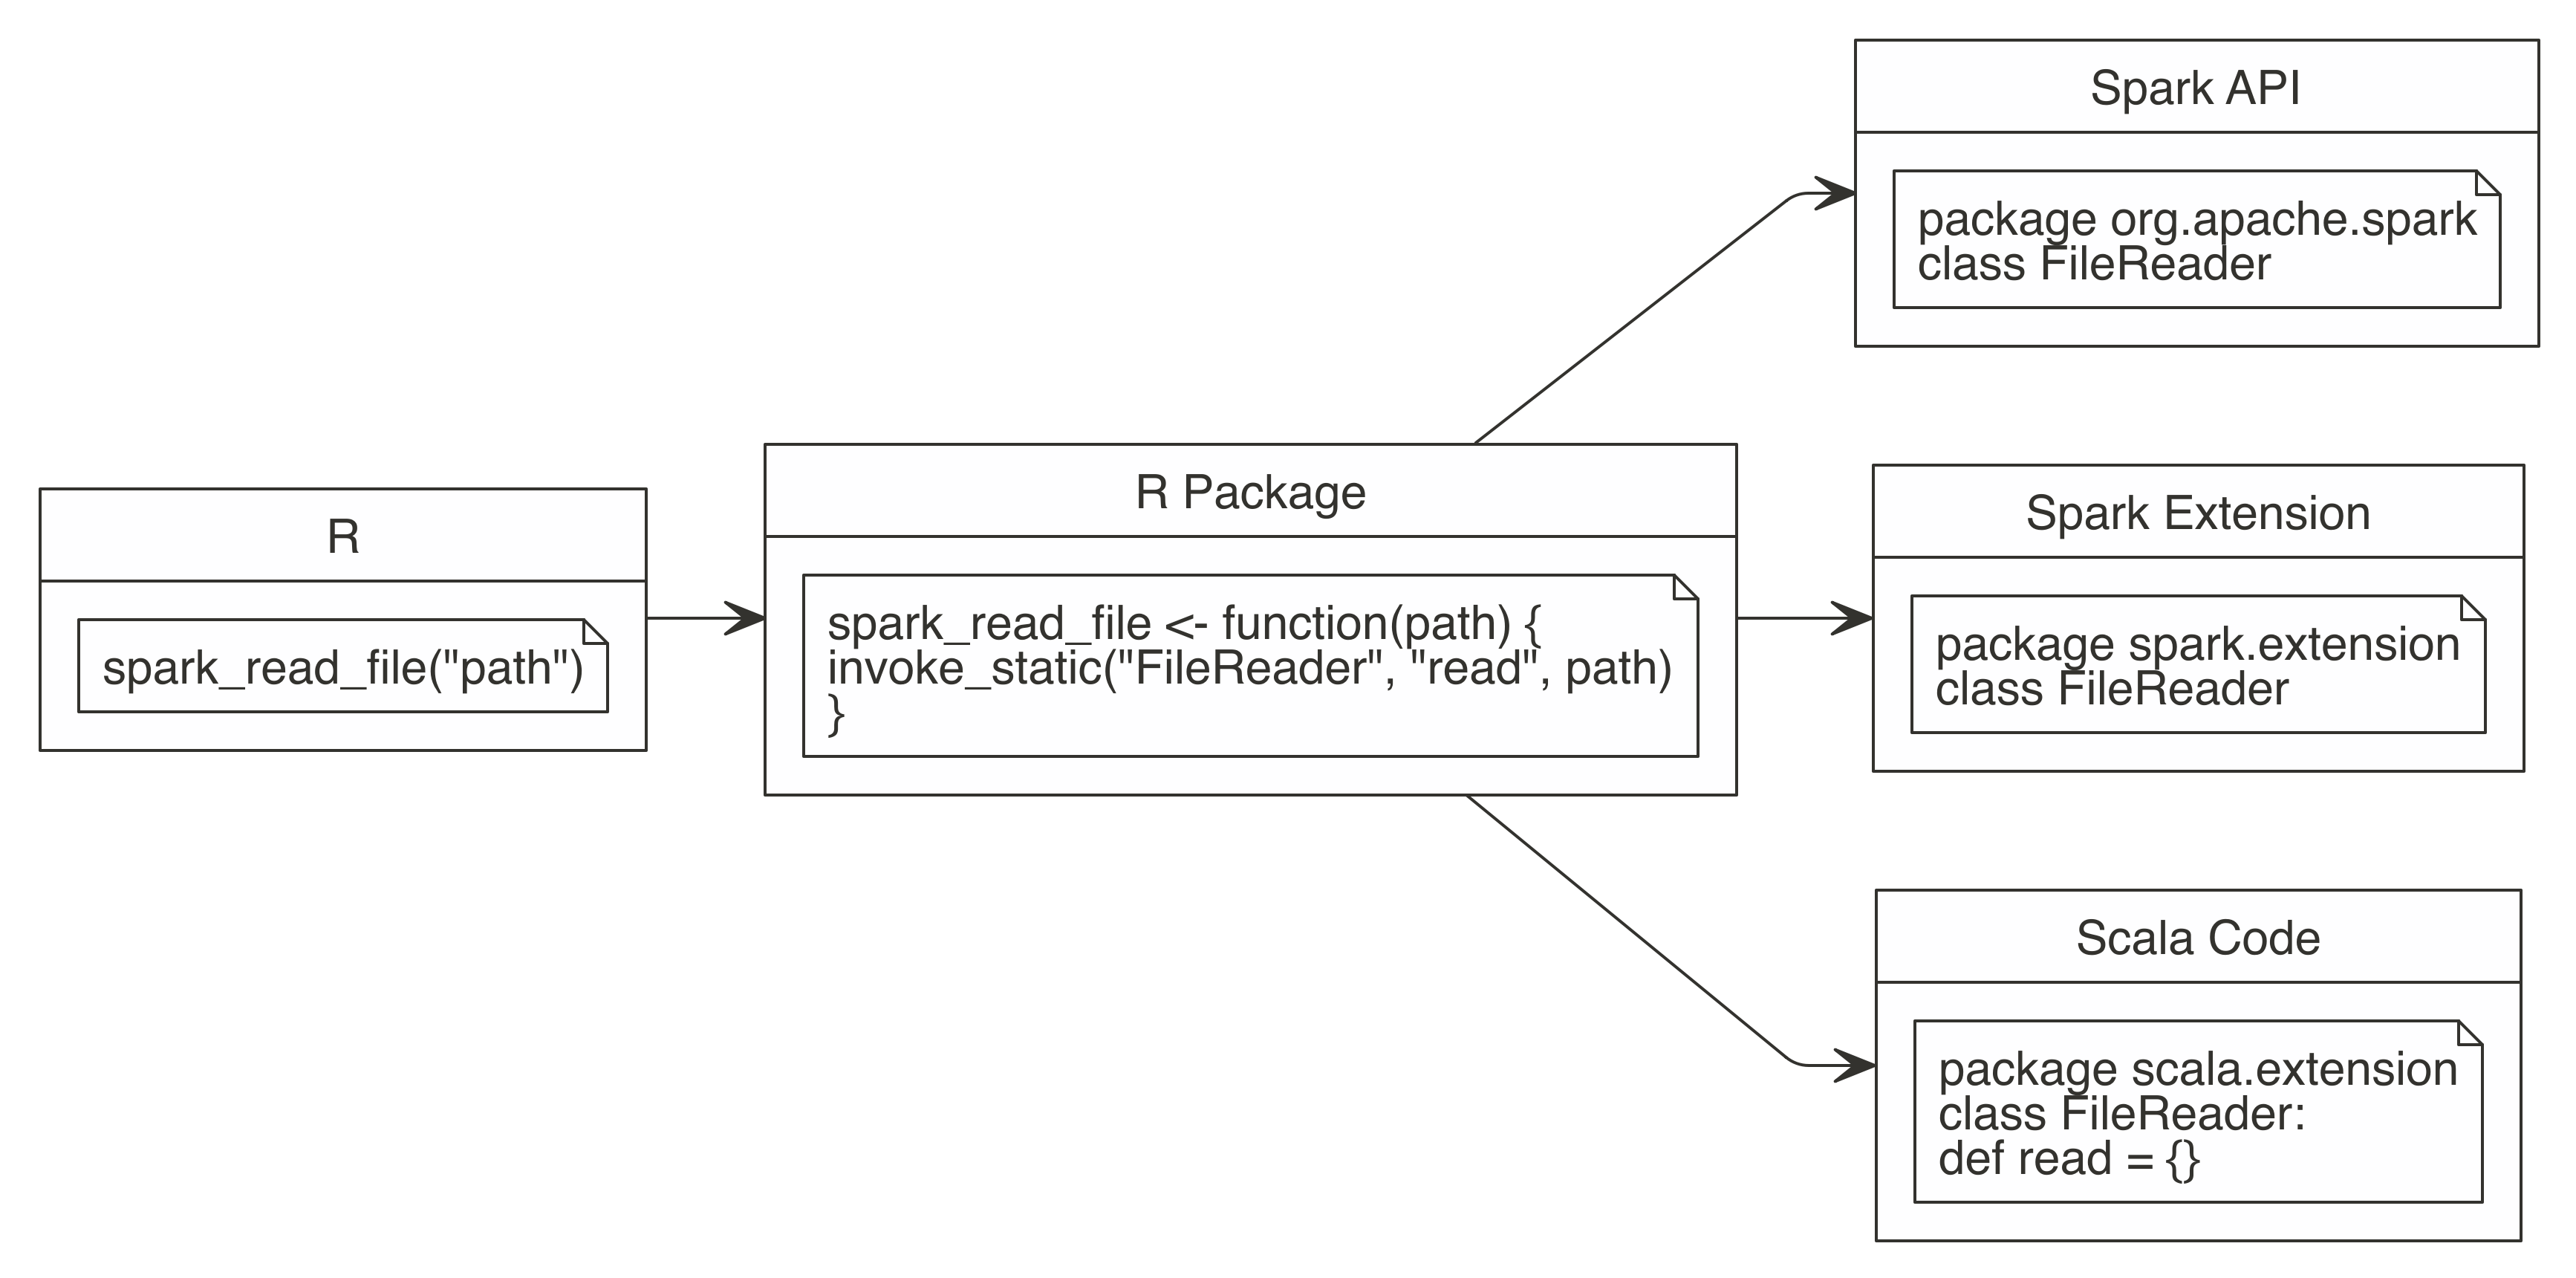 Extending Spark using the Spark API or Spark extensions, or writing Scala code